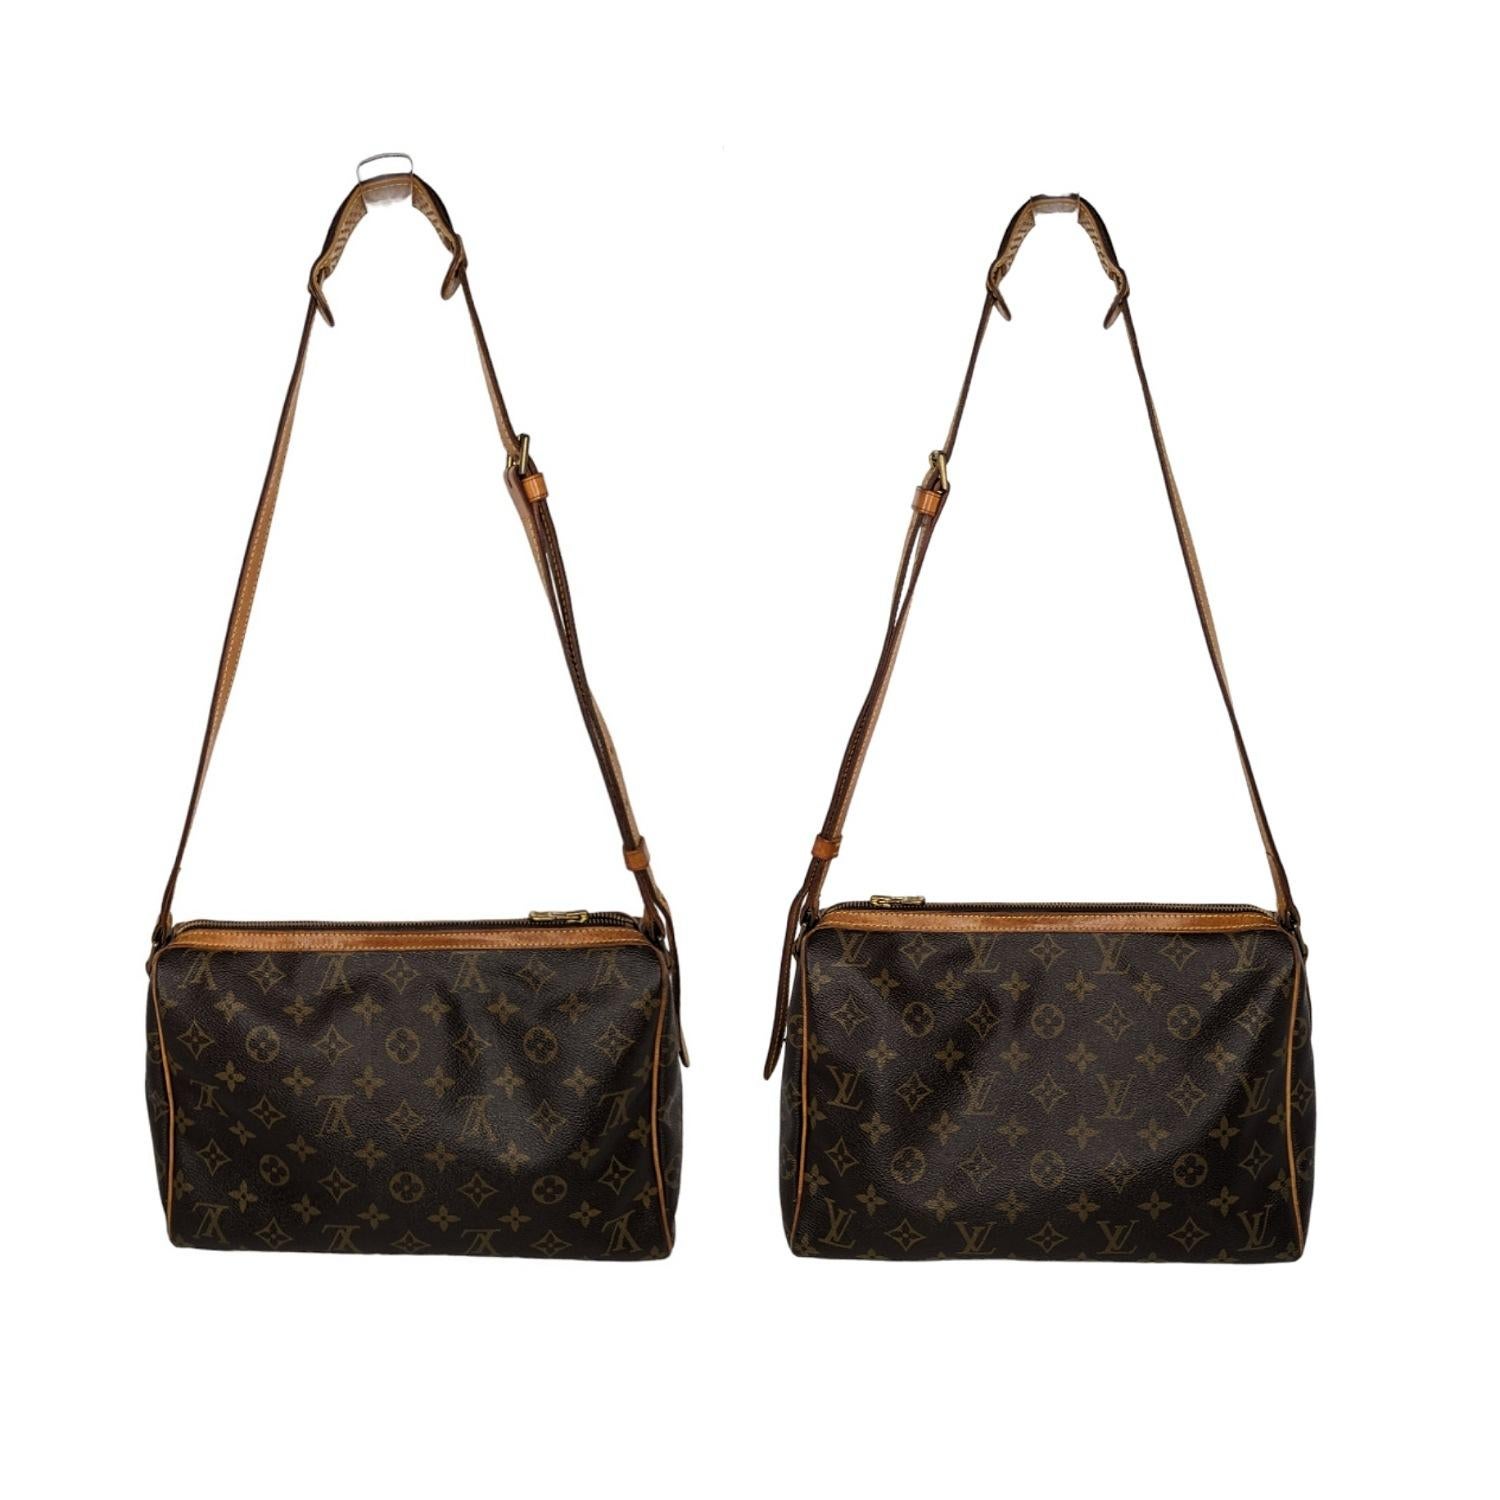 This shoulder bag is crafted of classic Louis Vuitton monogram coated canvas. The bag features signature vachetta leather piping trim, an adjustable crossbody strap and a brass top zipper that opens to a terra cotta cross-grain leather interior with